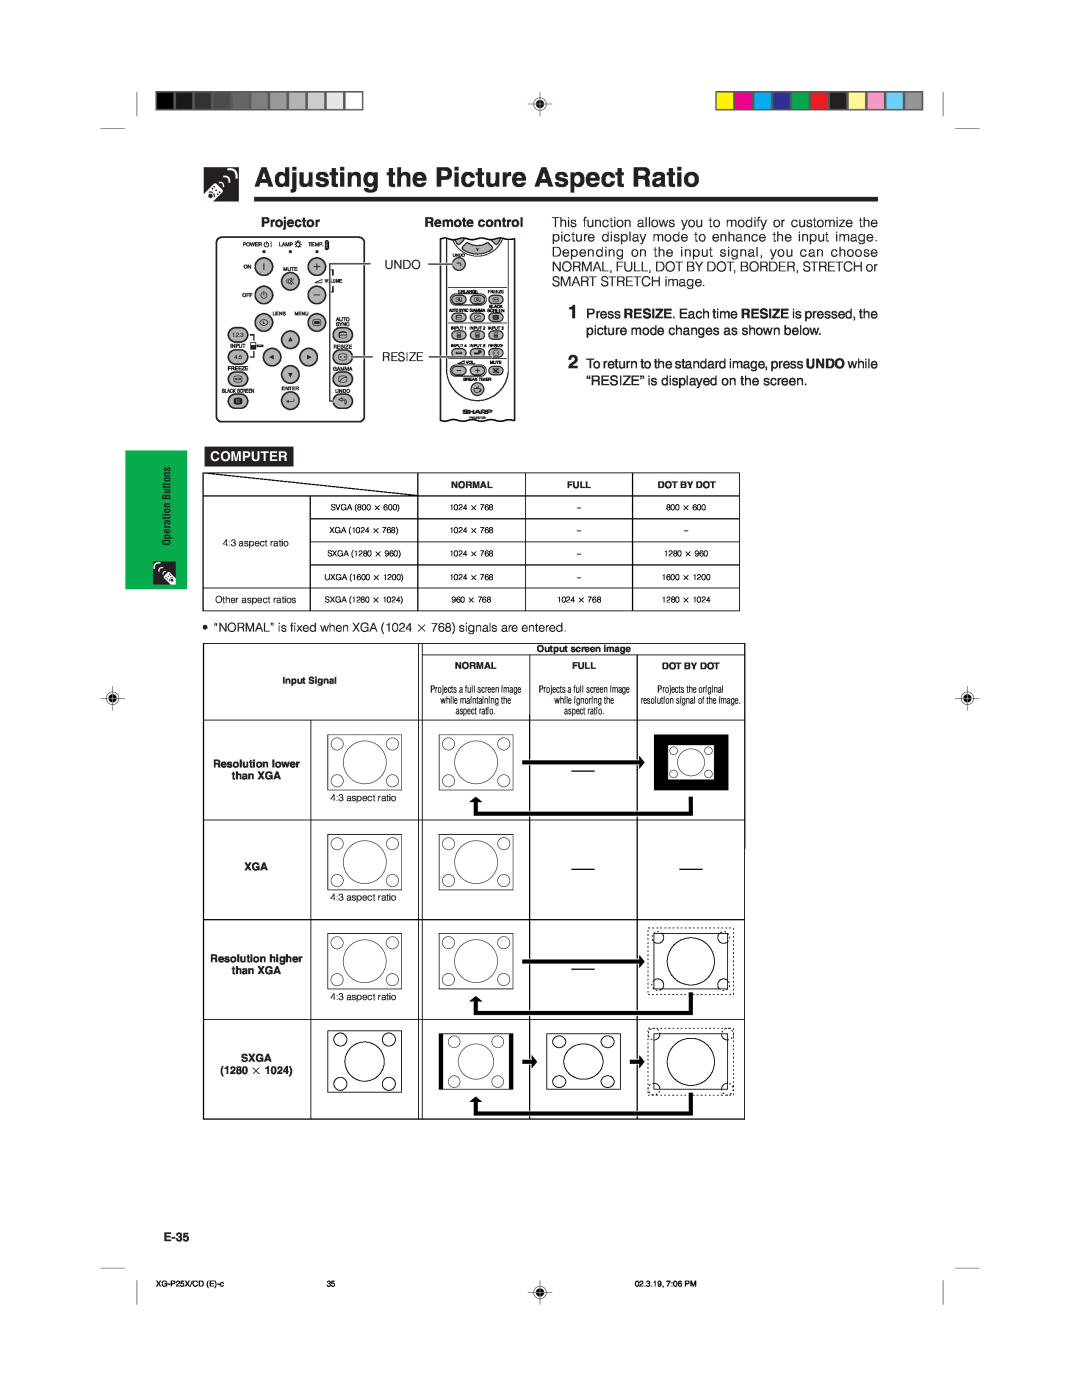 Sharp XG-P25X operation manual Adjusting the Picture Aspect Ratio, Projector, Remote control, Computer 